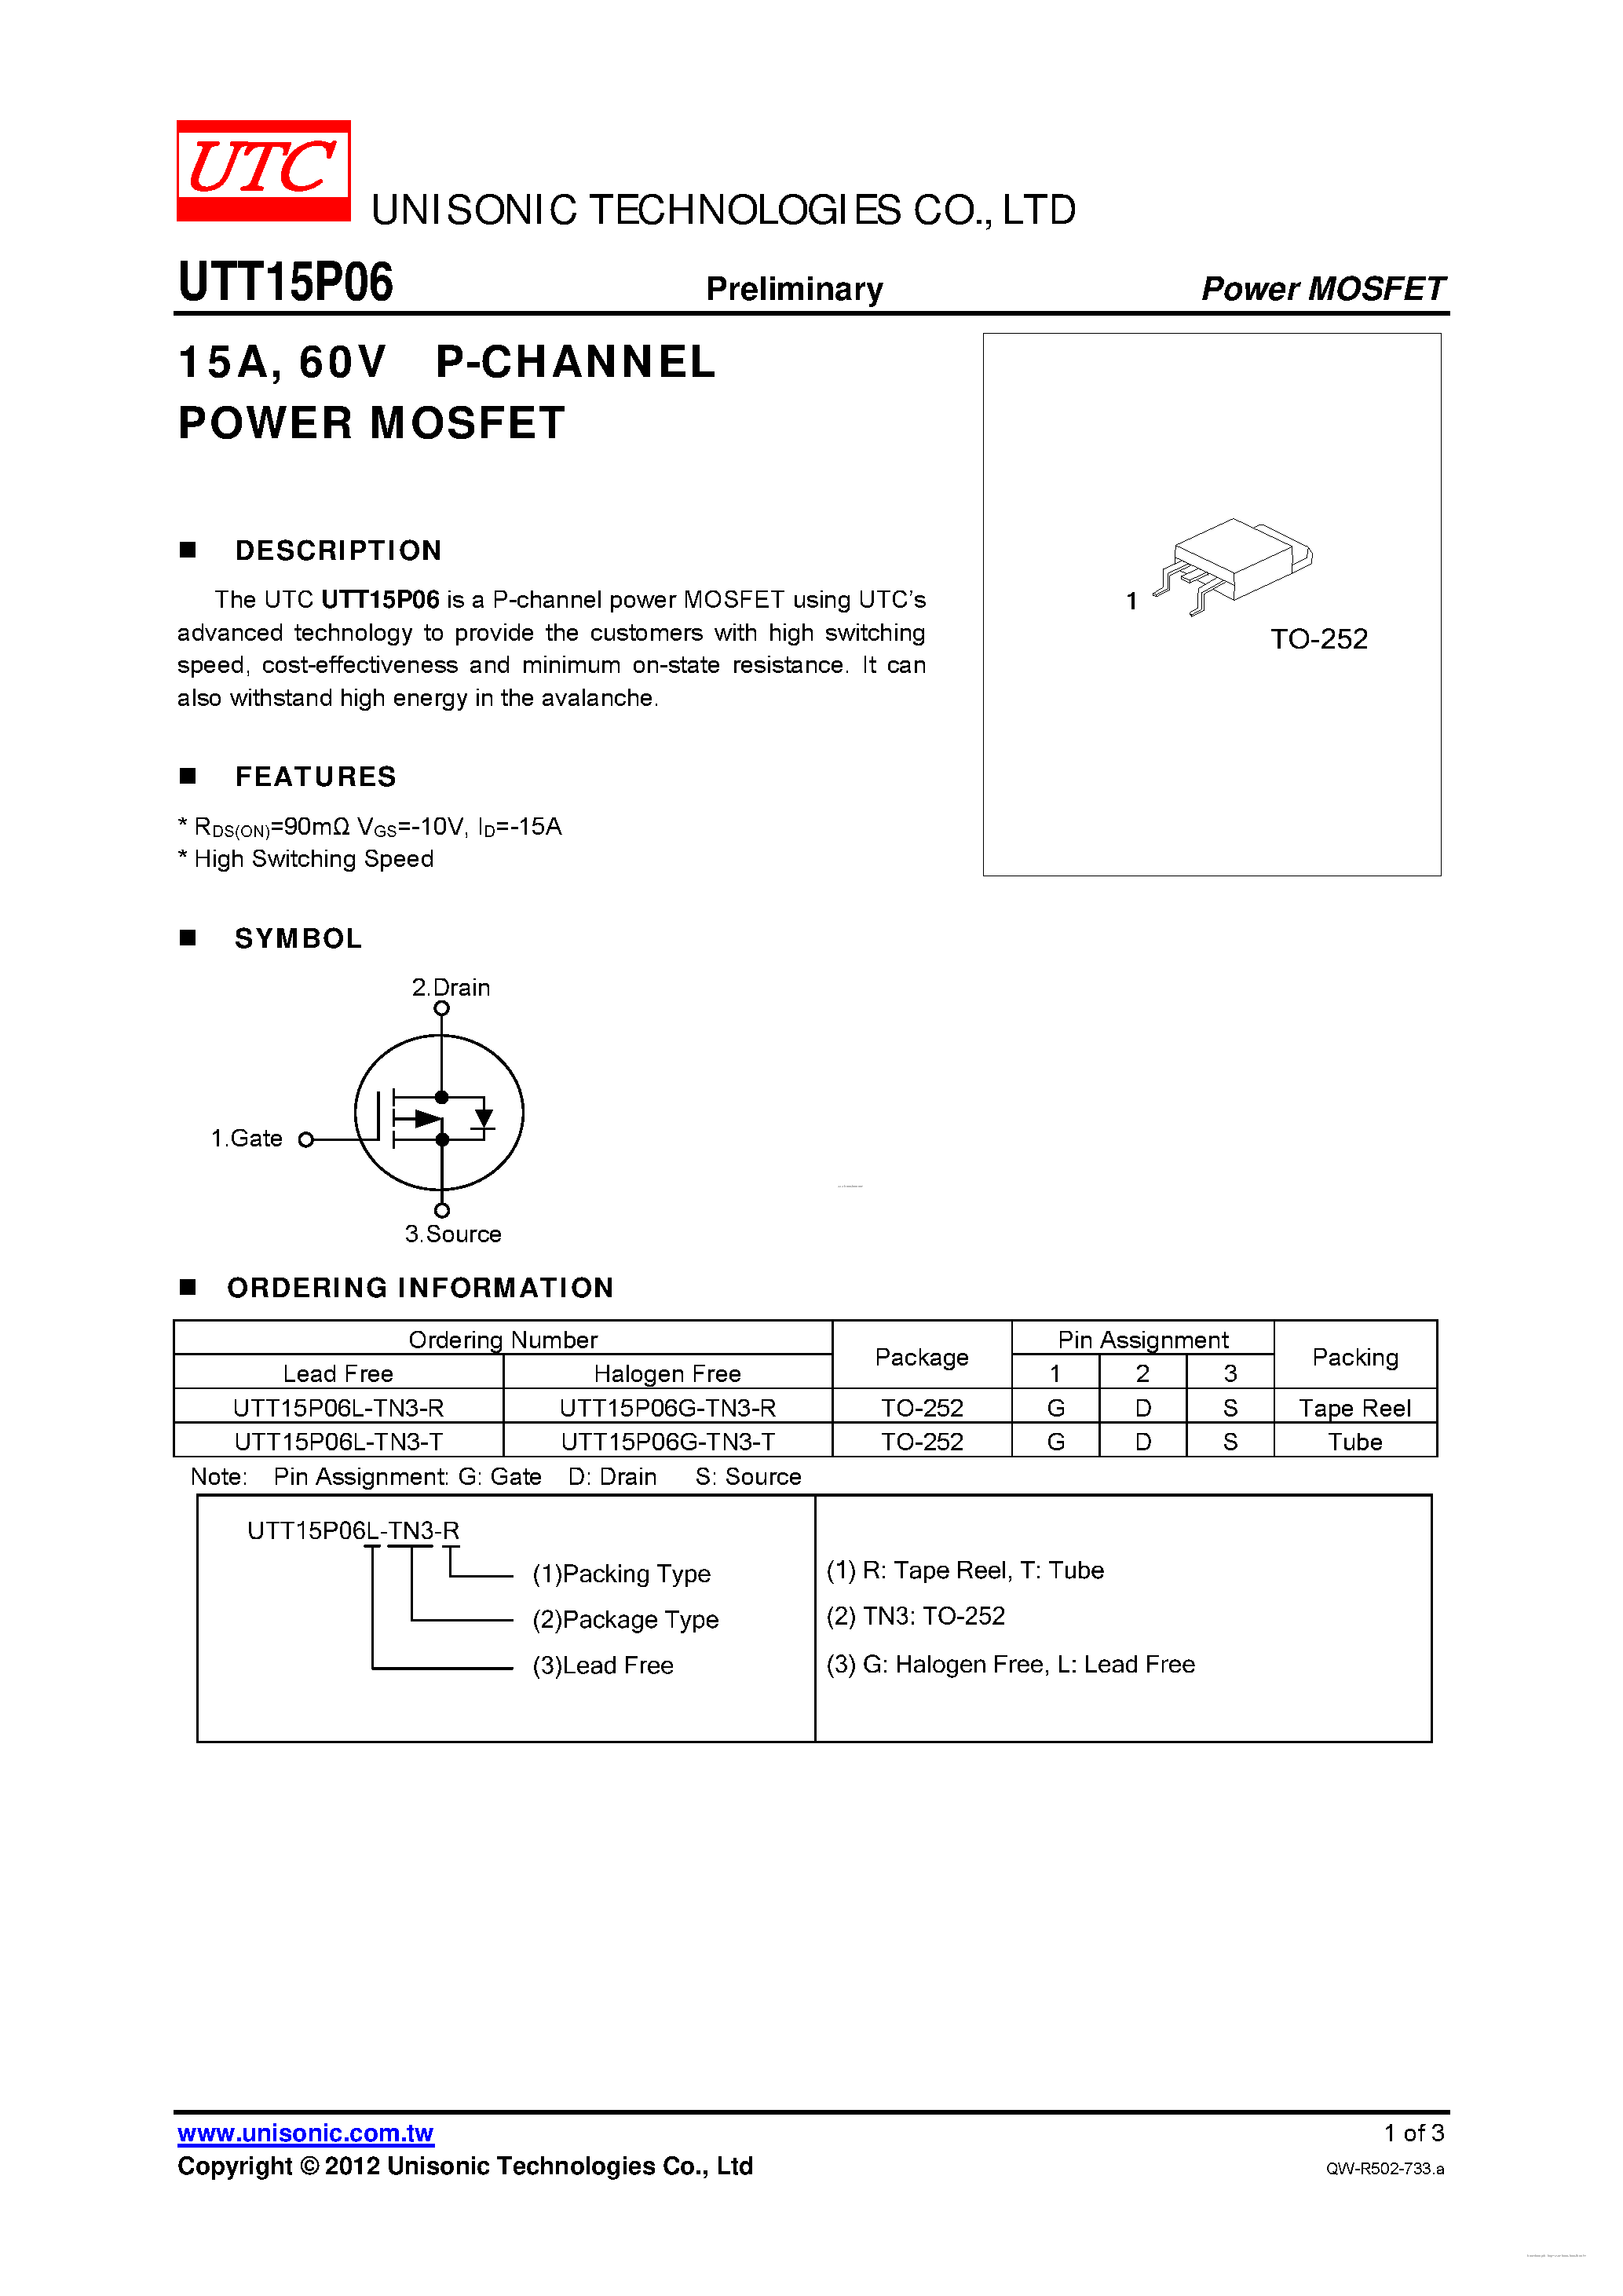 Datasheet UTT15P06 - P-CHANNEL POWER MOSFET page 1